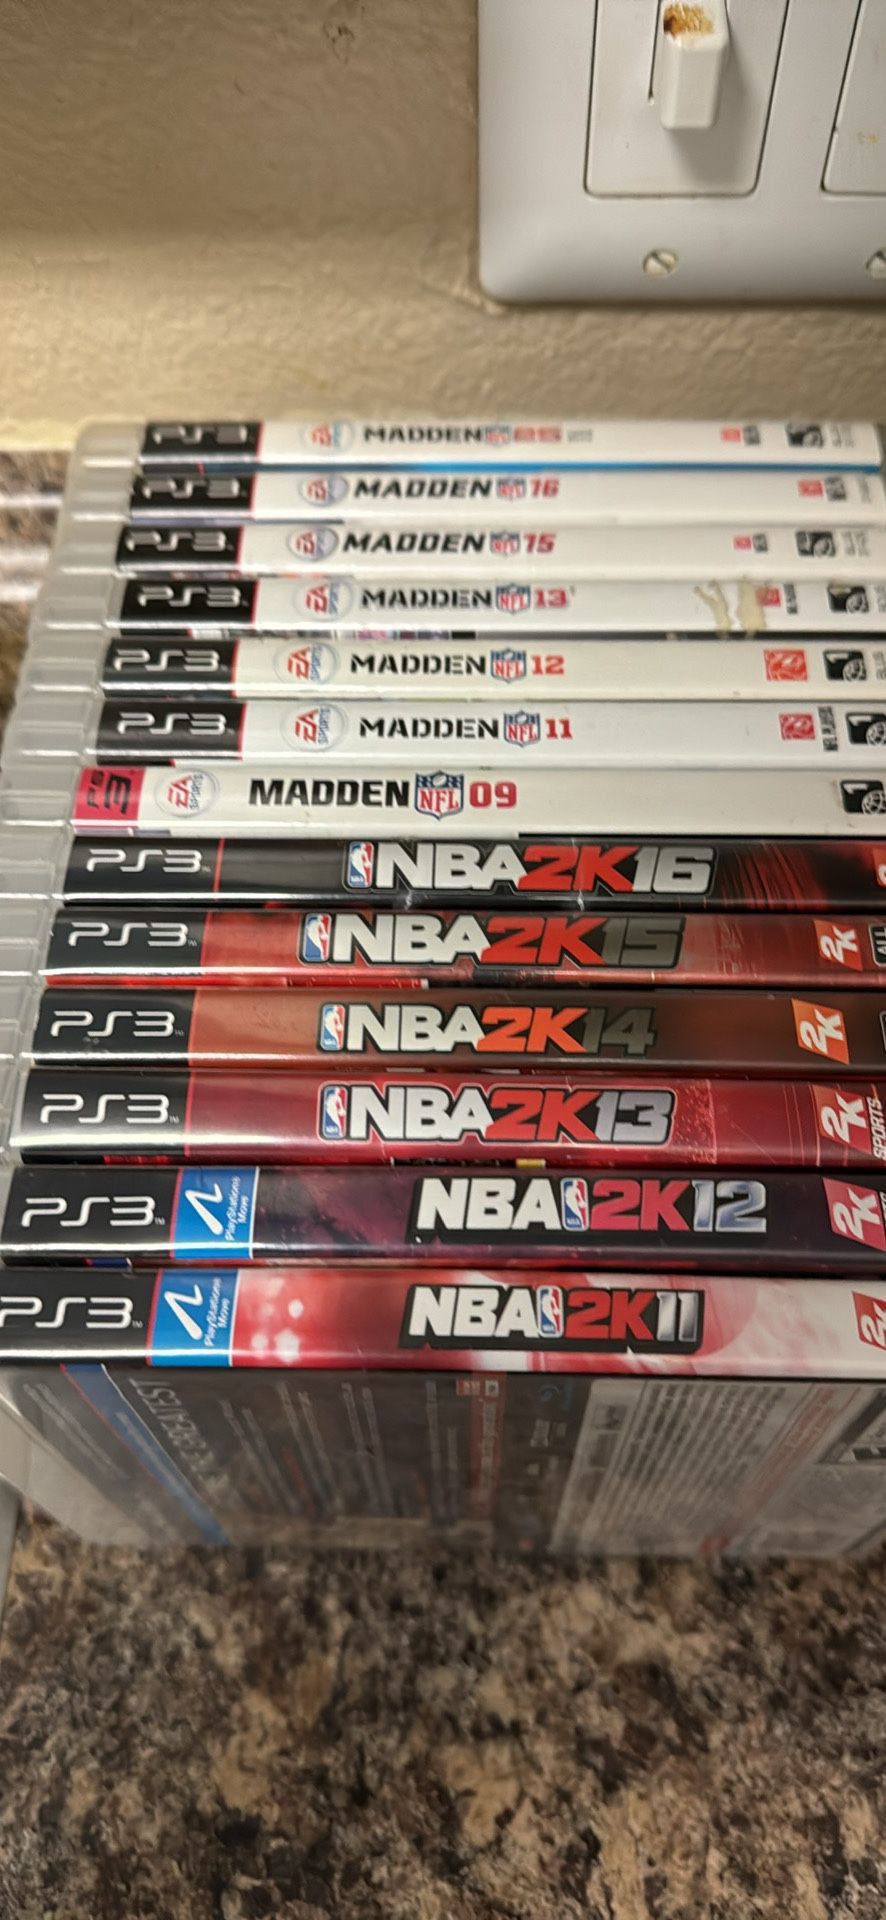 PS3, PS4, and PS5 Games